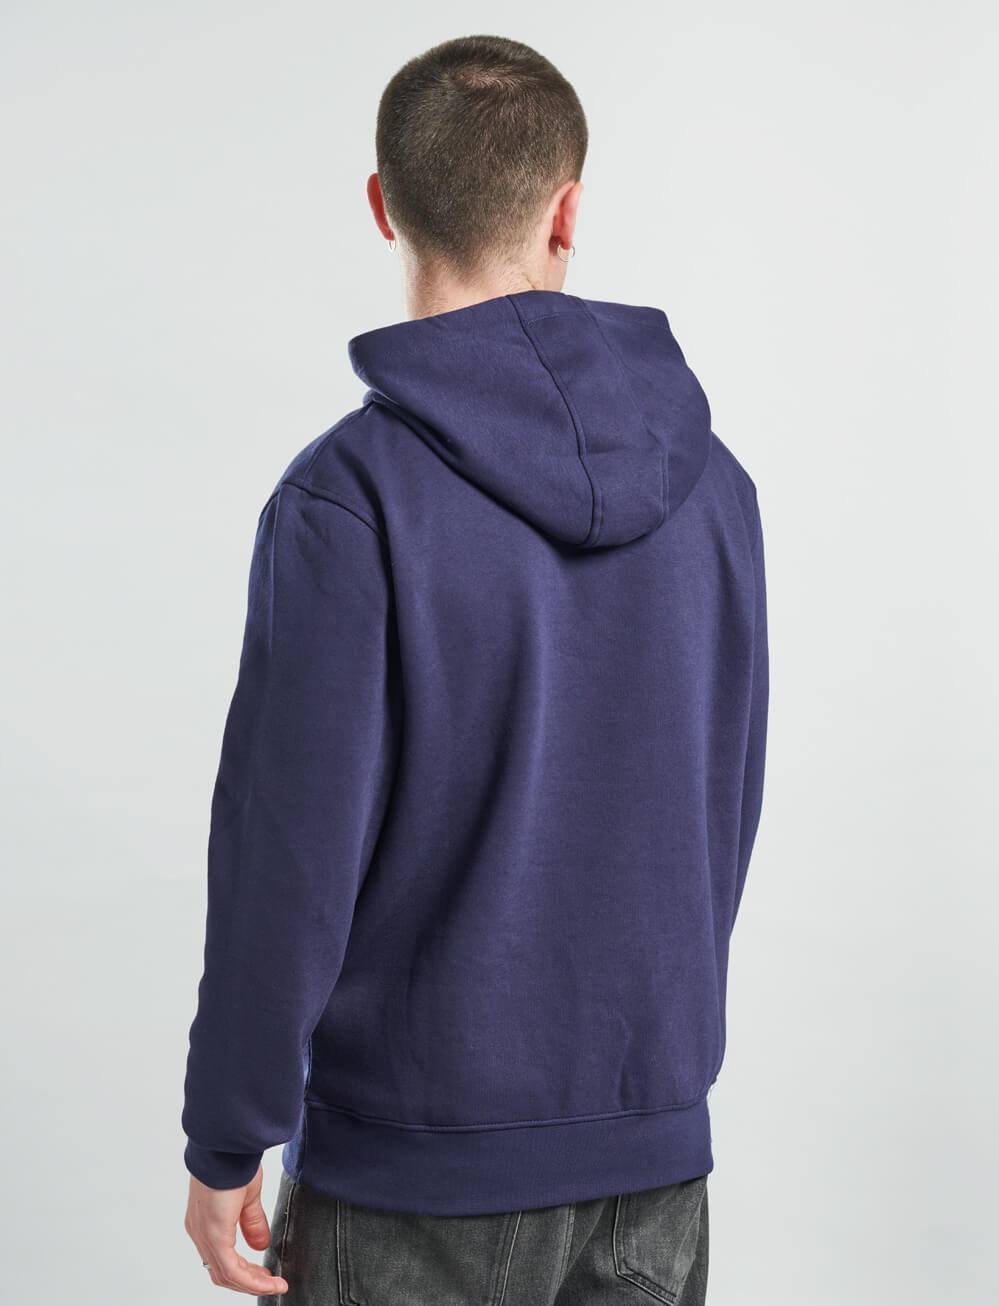 Official FC Barcelona Hoodie - Navy - The World Football Store